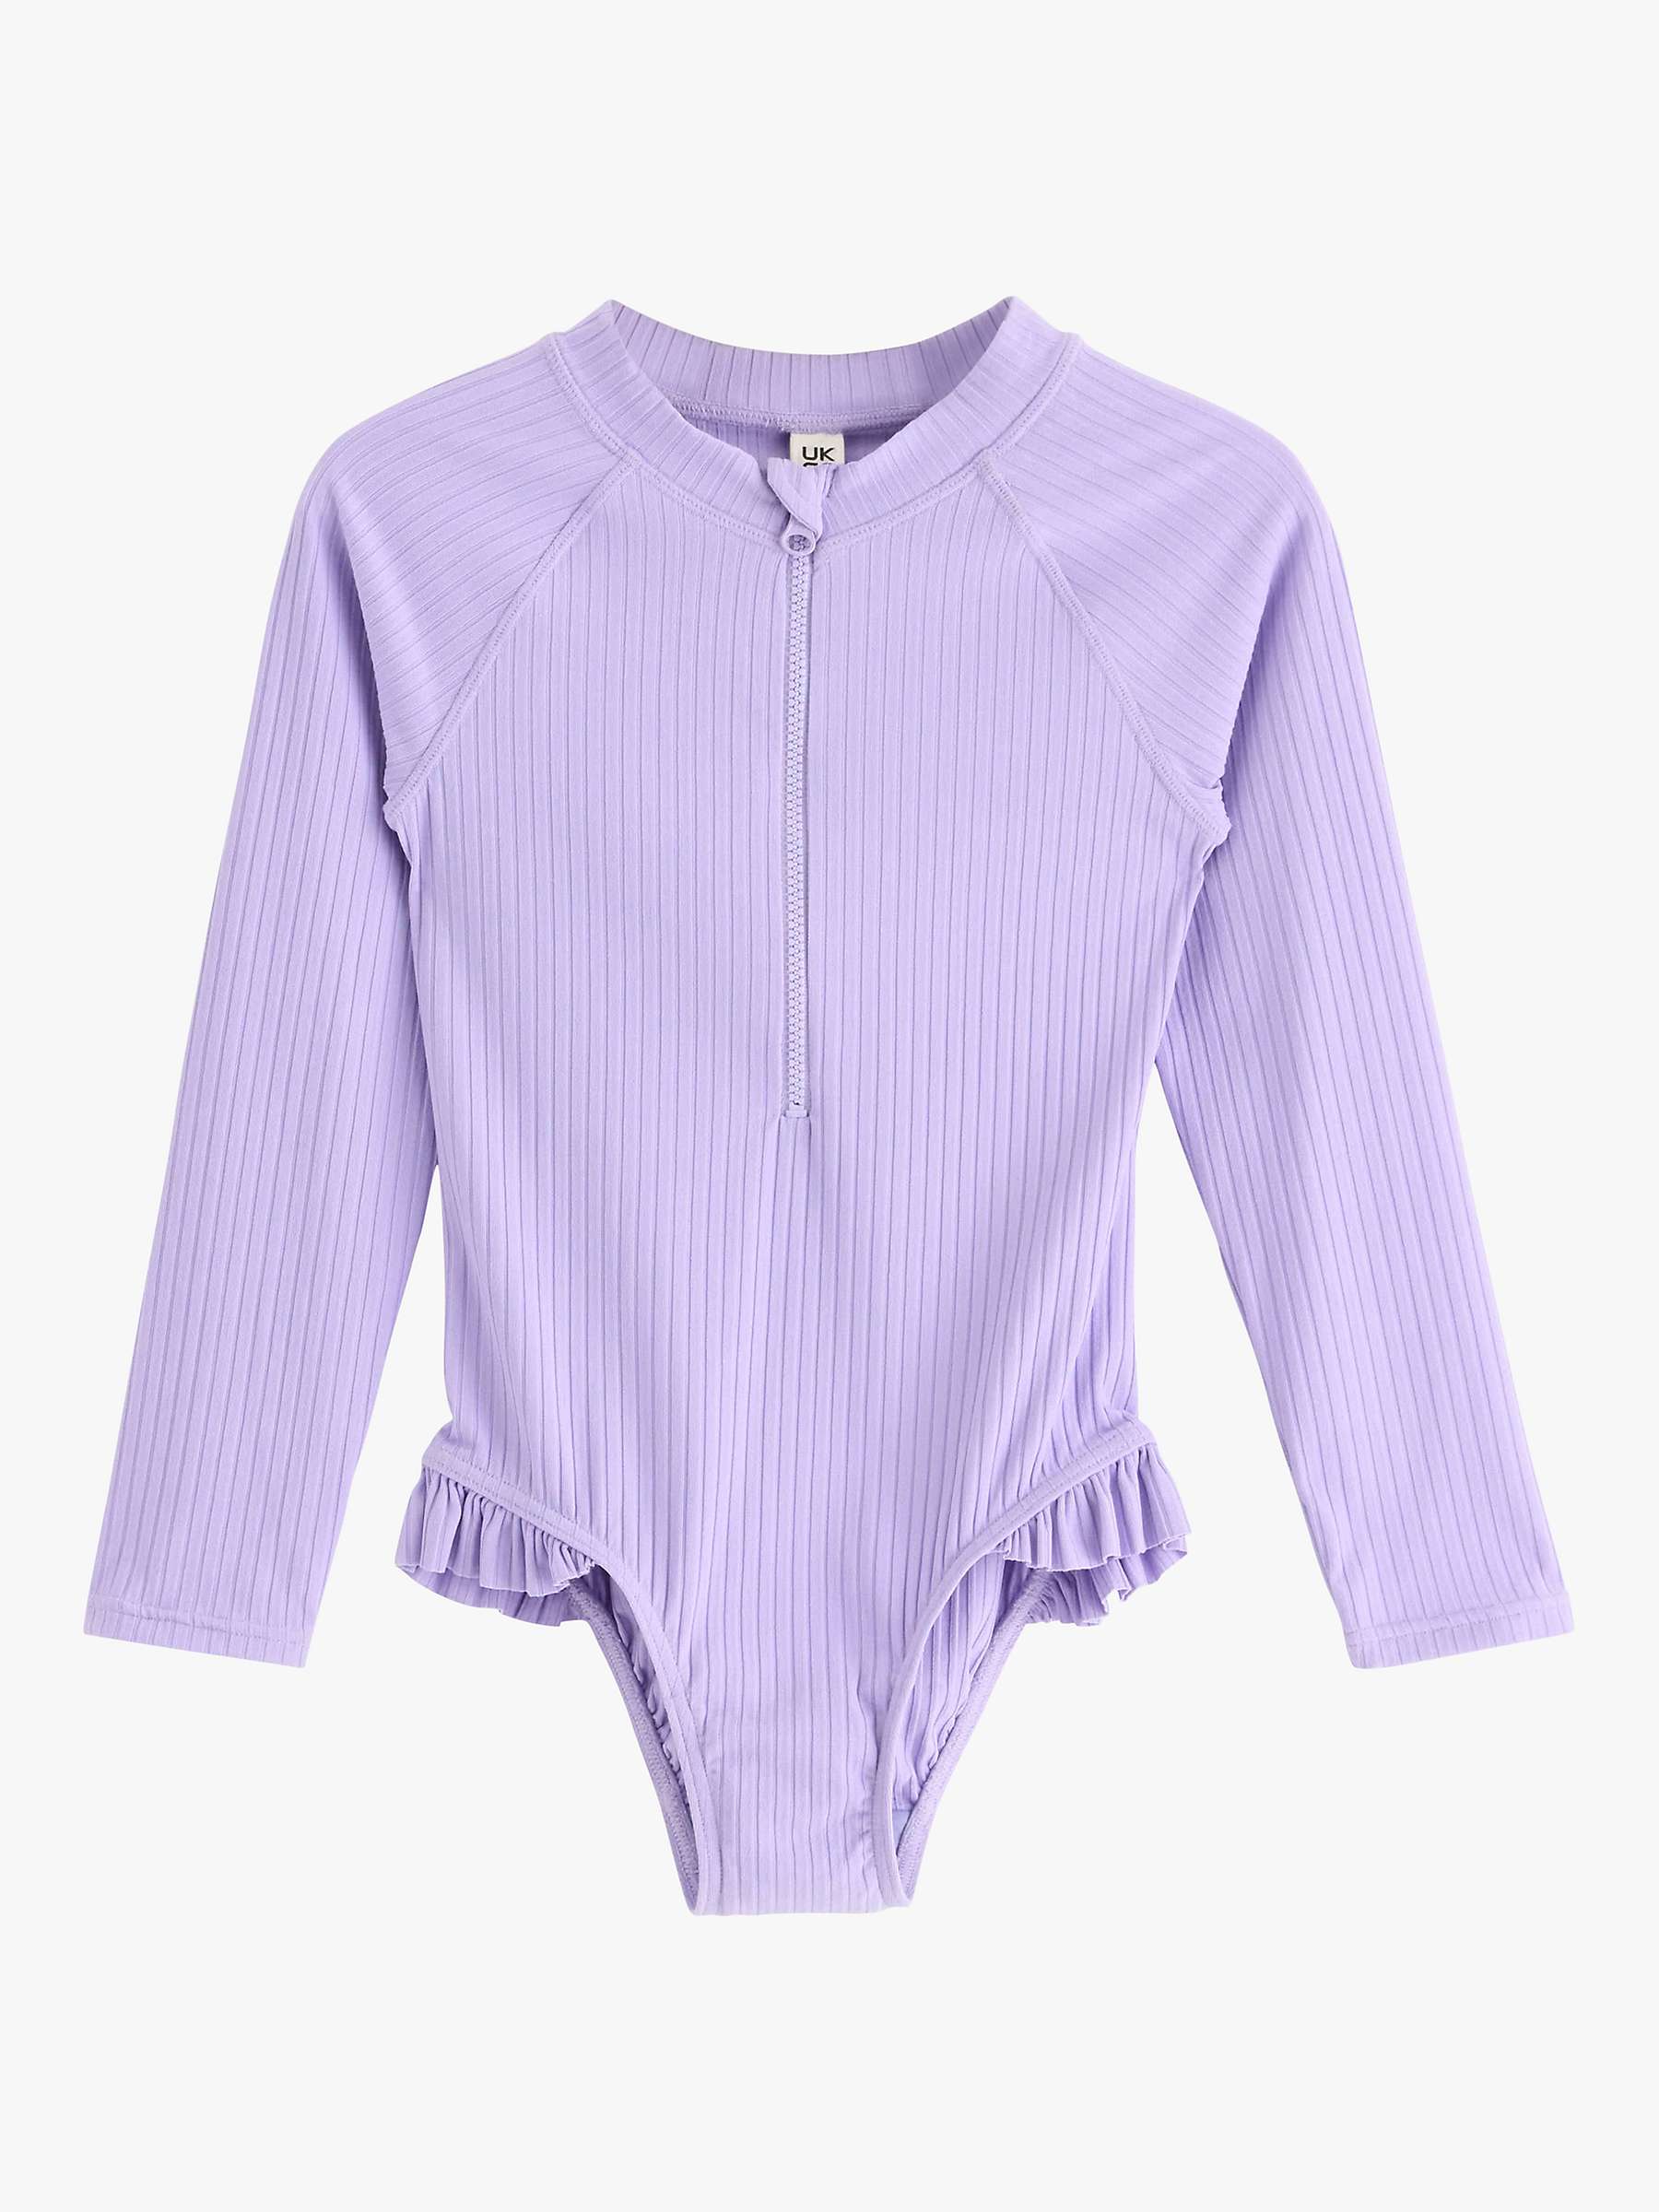 Buy Lindex Kids' UV 50+ Protection Rib Long Sleeve Swimsuit, Light Lilac Online at johnlewis.com